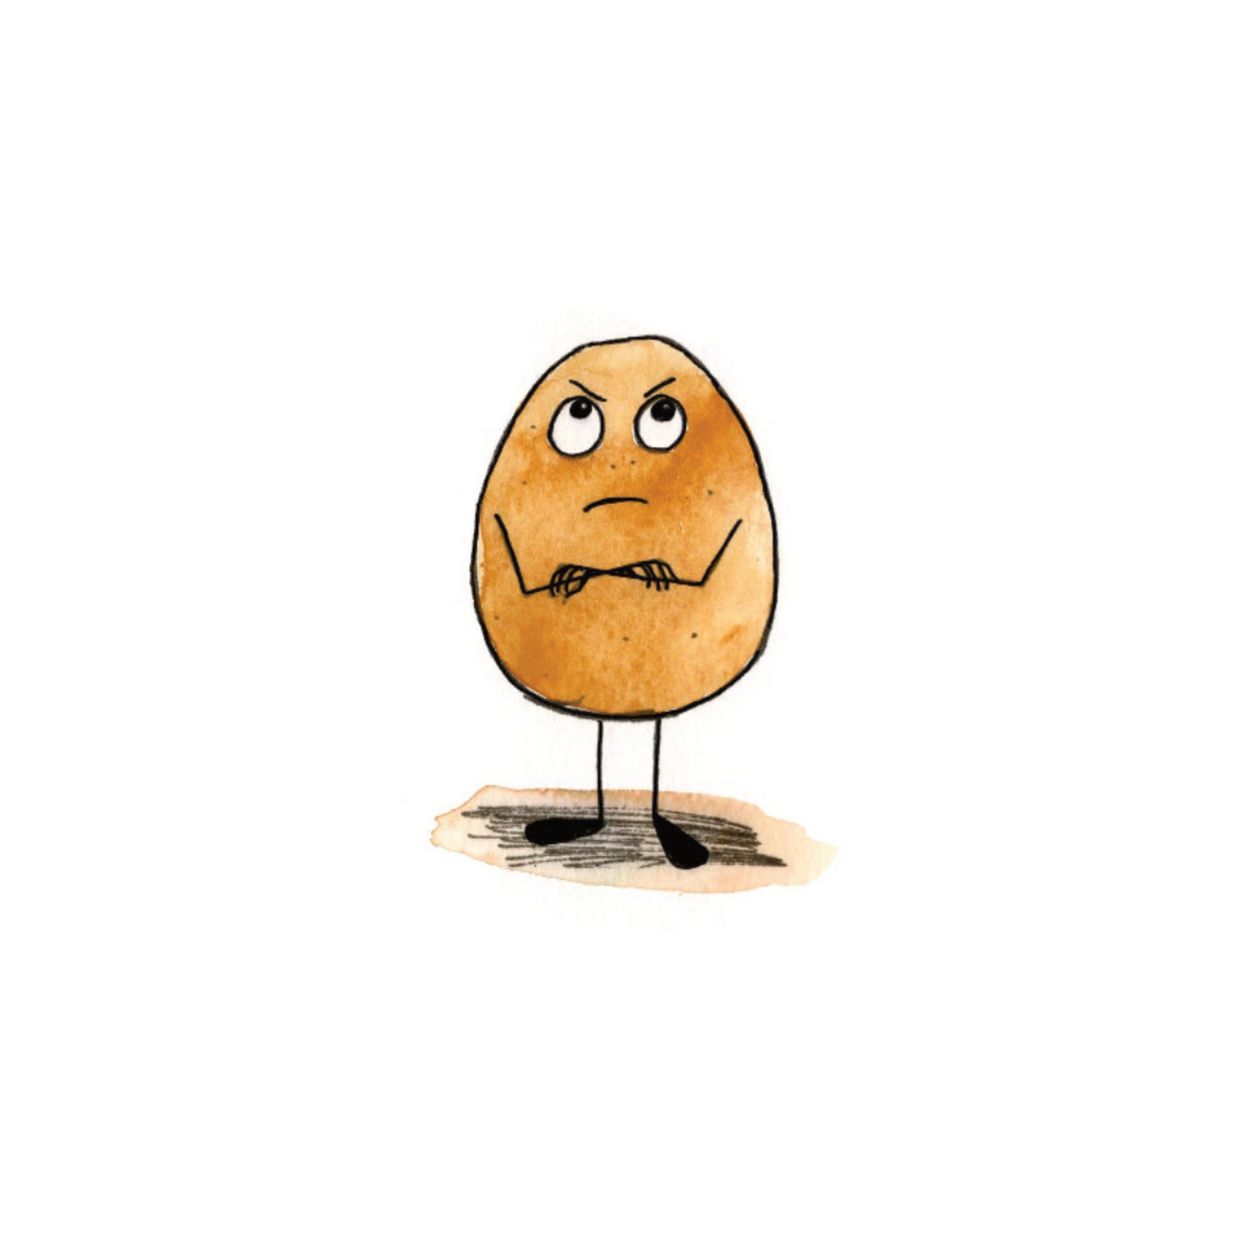 Marcus the pet potato looking grumpy
New book release Emily and the Pet Potato